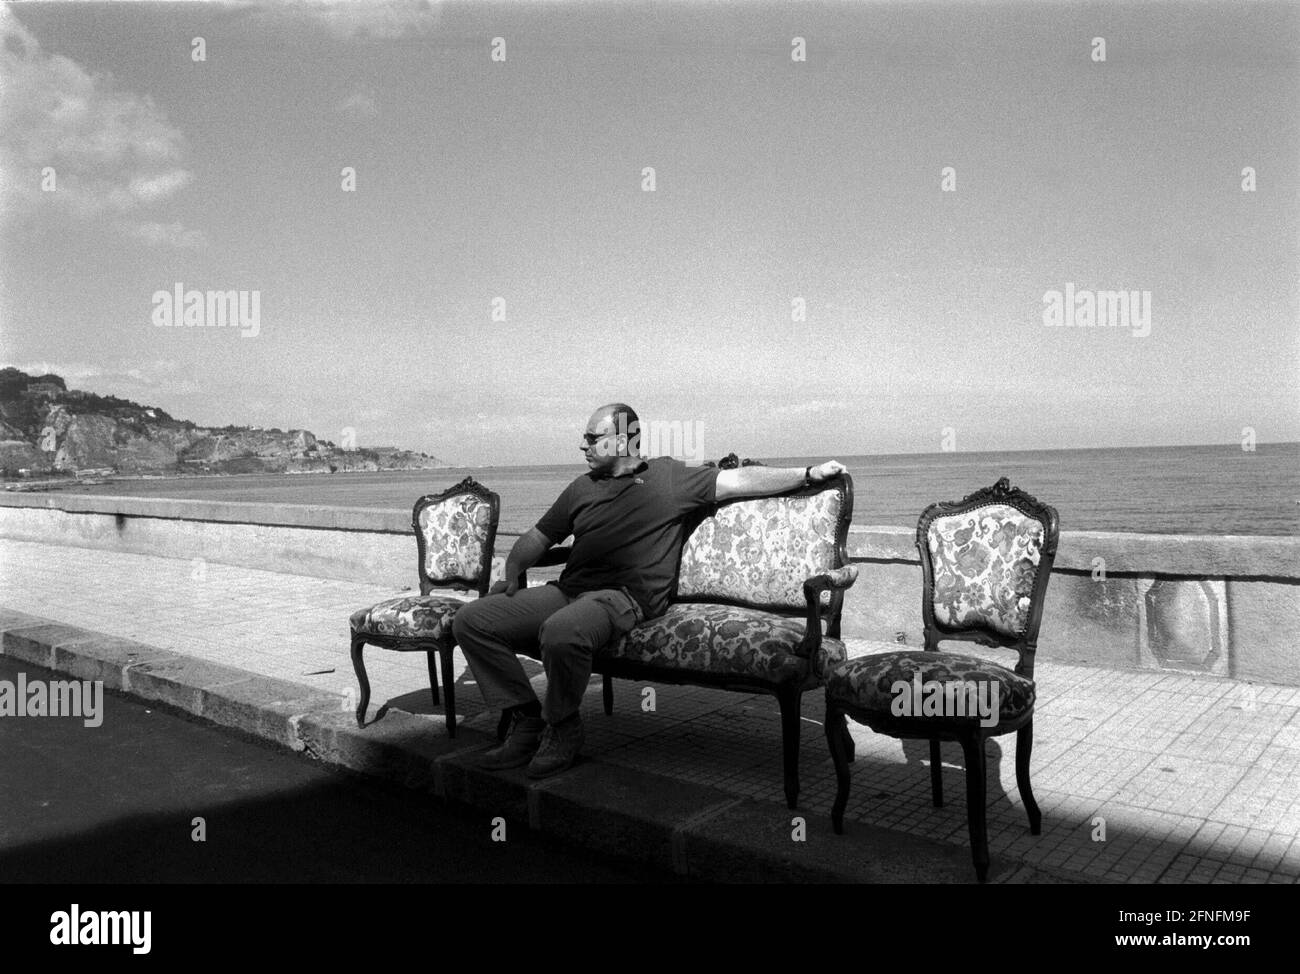 Antique market on the promenade at the beach of Giardini Naxos, man on sofa in front of the sea, Italy, Sicily, 26.05.1999, [automated translation] Stock Photo